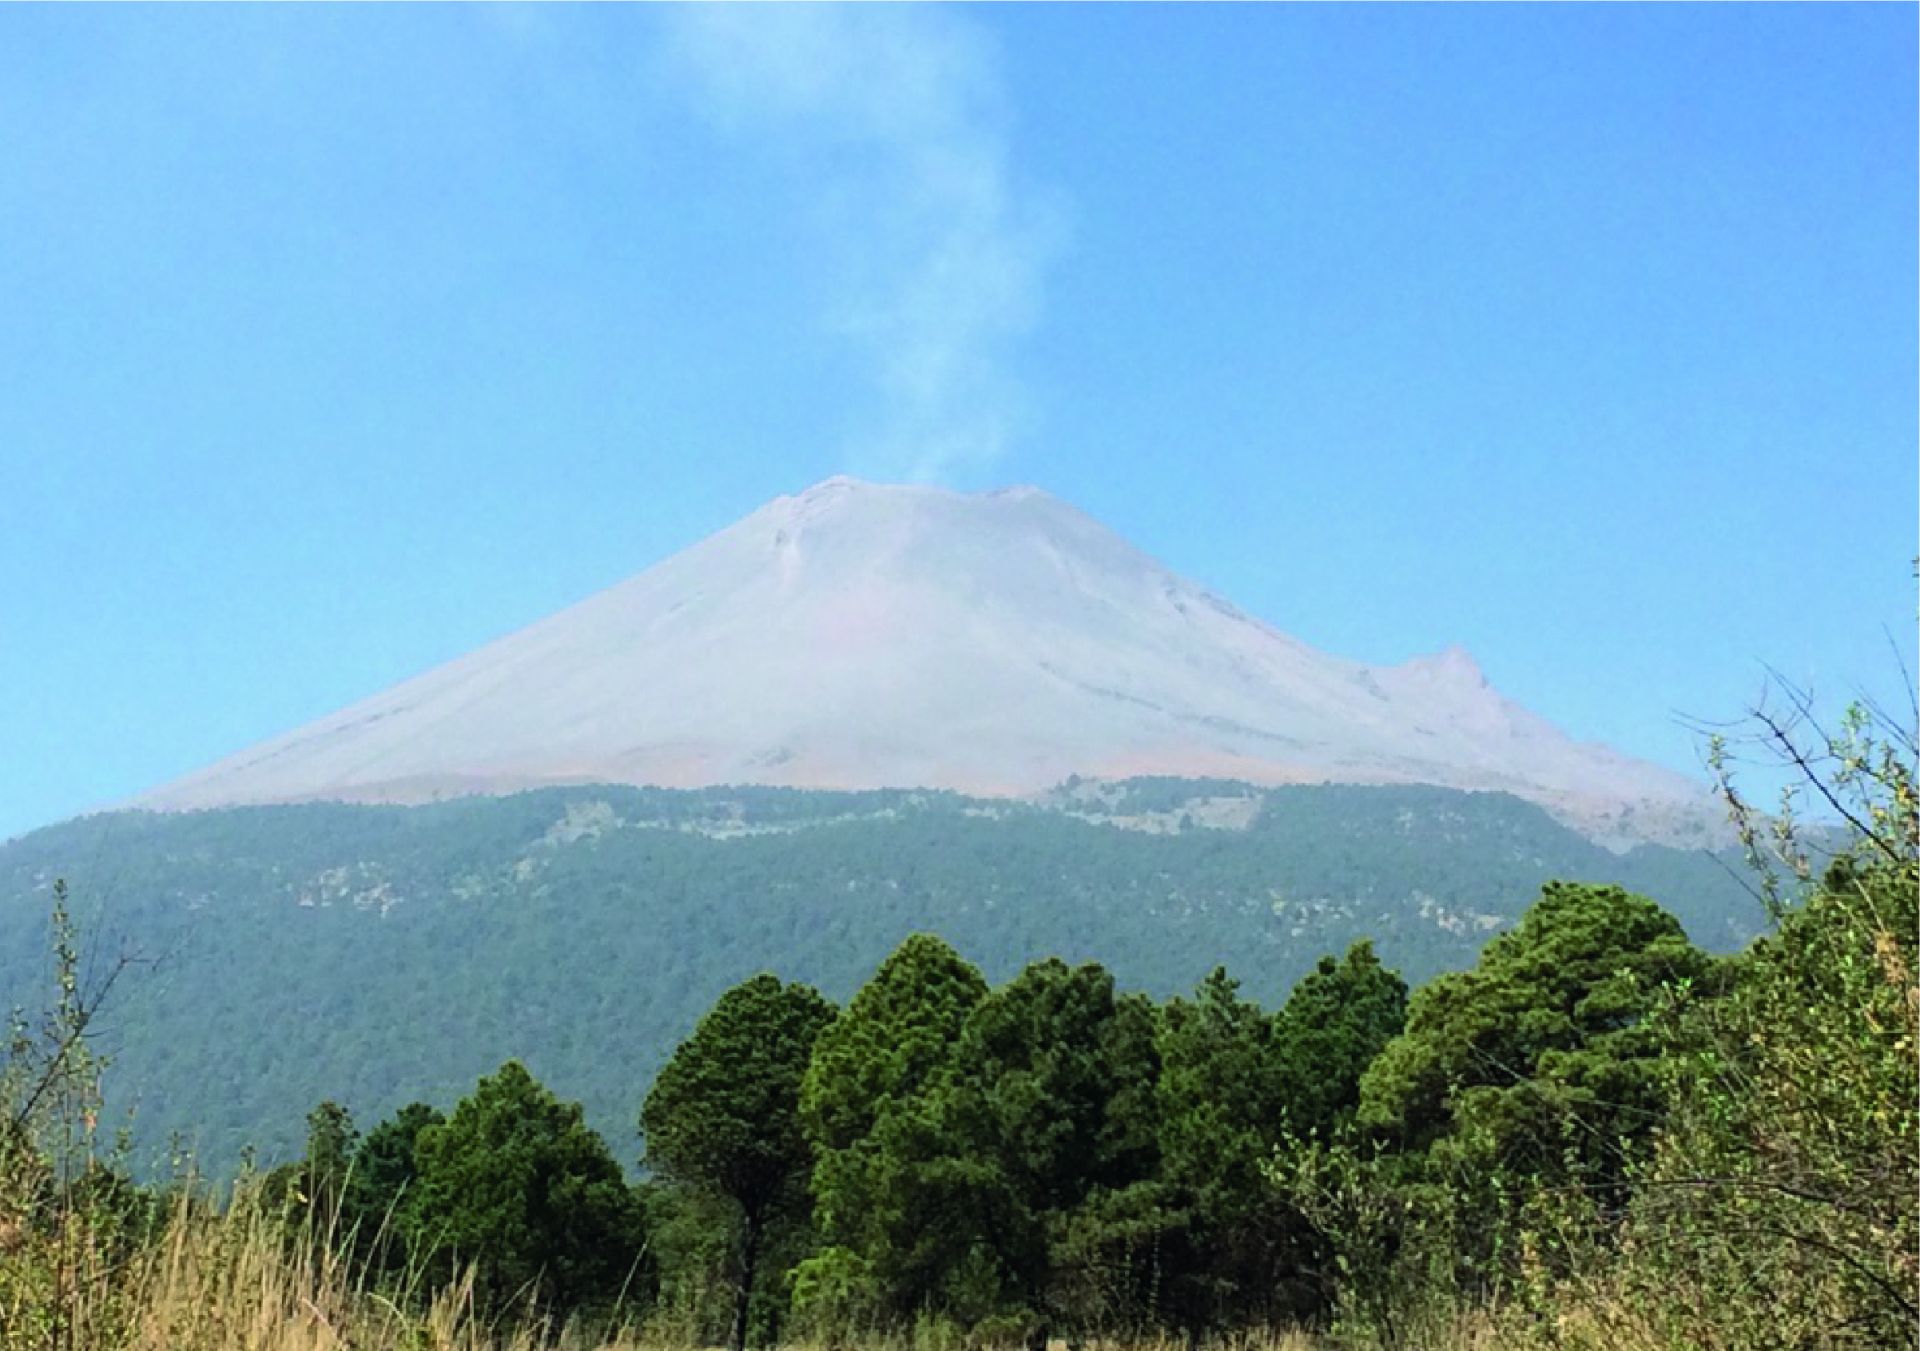 P50. Reconstructing volcano-stratigraphies and eruptive histories toward better constrained hazard assessment and risk mitigation